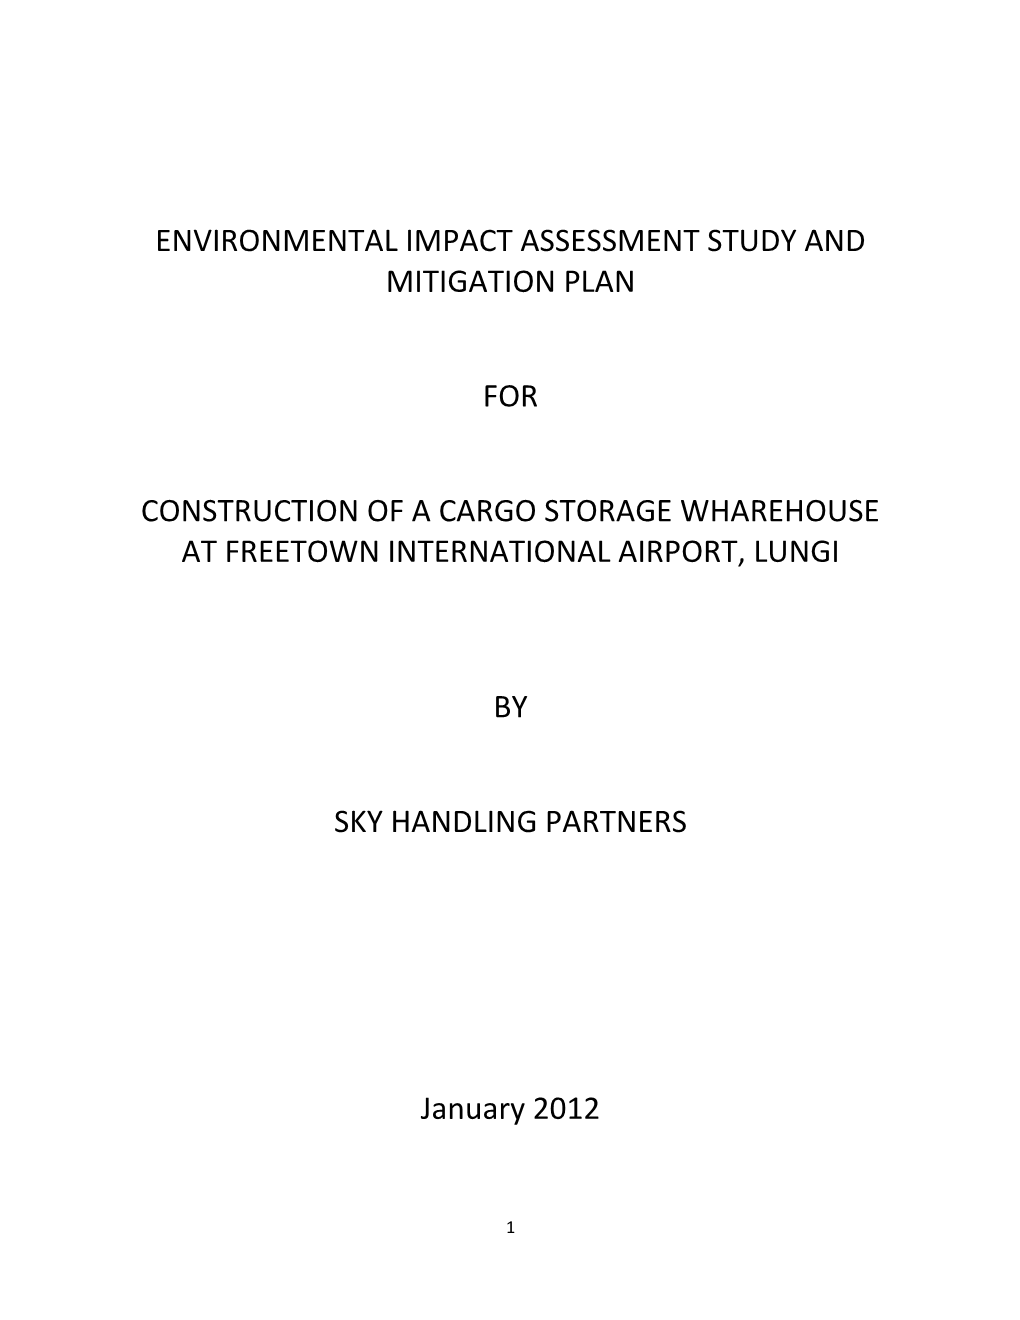 Environmental Impact Assessment Study and Mitigation Plan